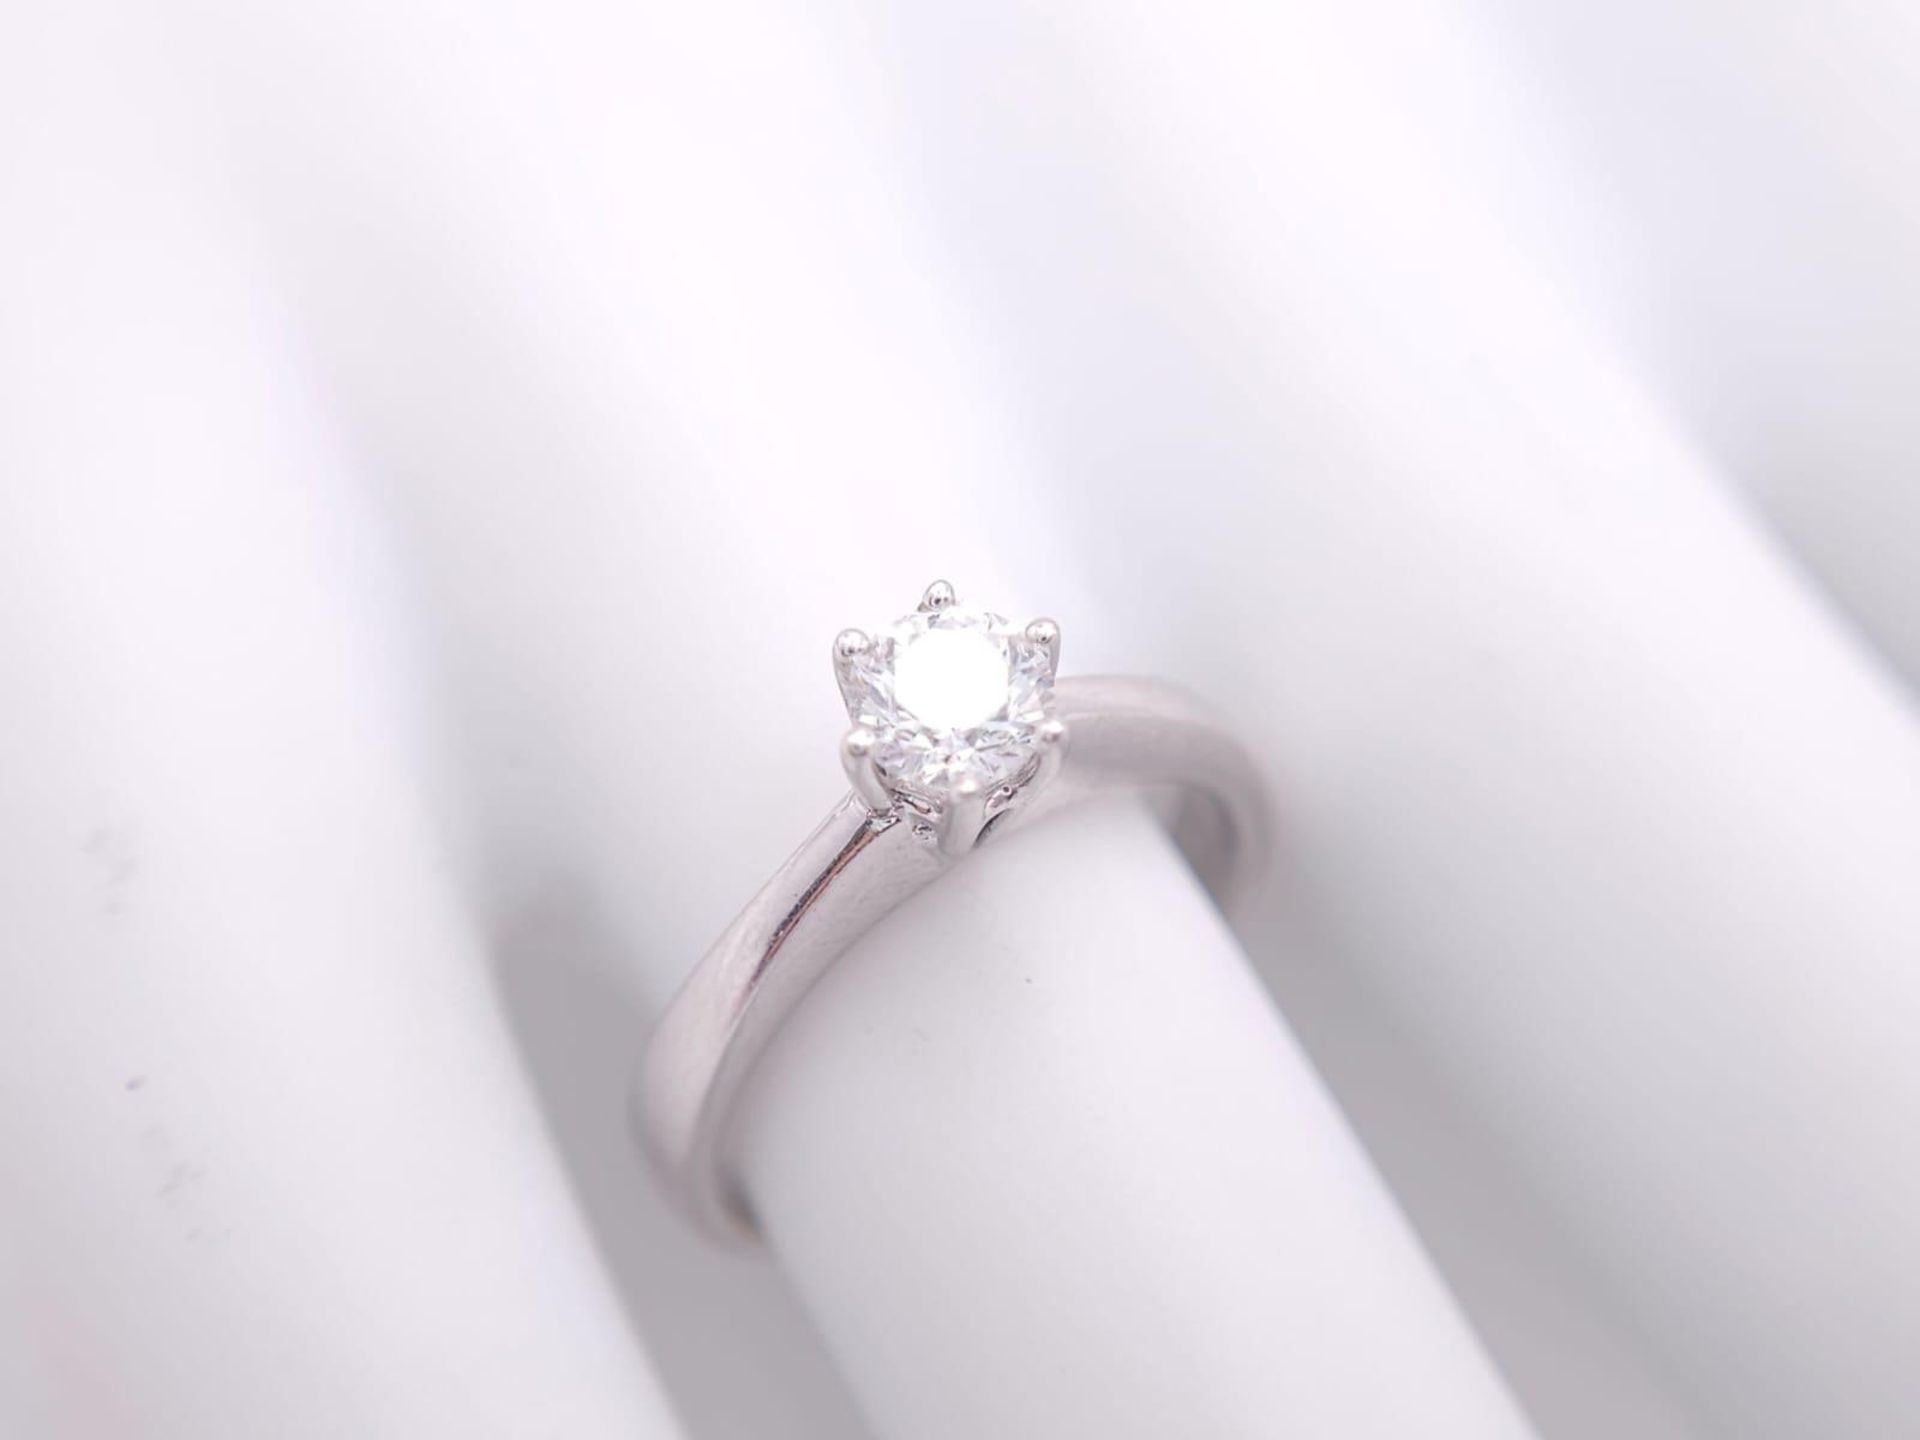 AN 18K WHITE GOLD DIAMOND SOLITAIRE RING - 0.50CT. 6 CLAW SETTING. 3.9G. SIZE N - Bild 7 aus 7